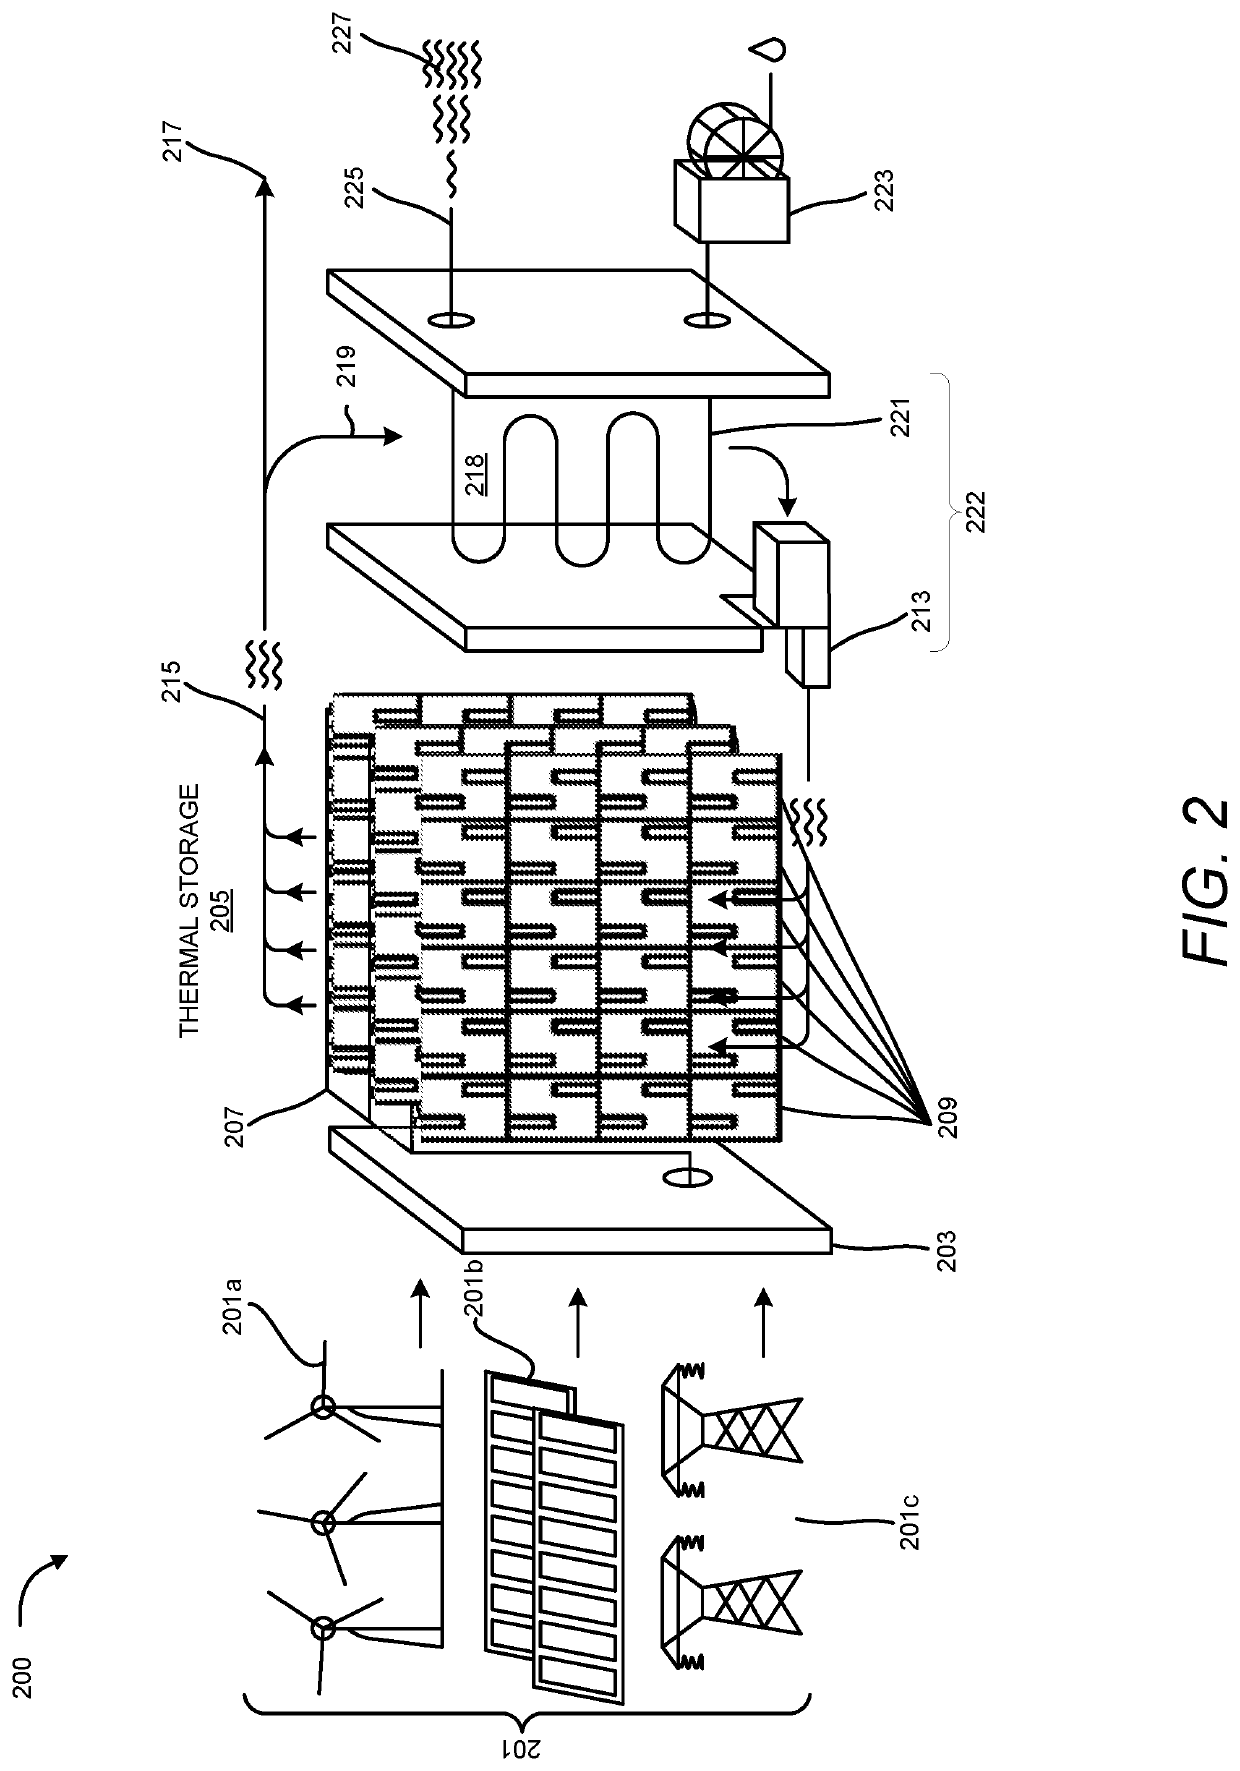 Thermal Energy Storage System With Heat Discharge System to Prevent Thermal Runaway